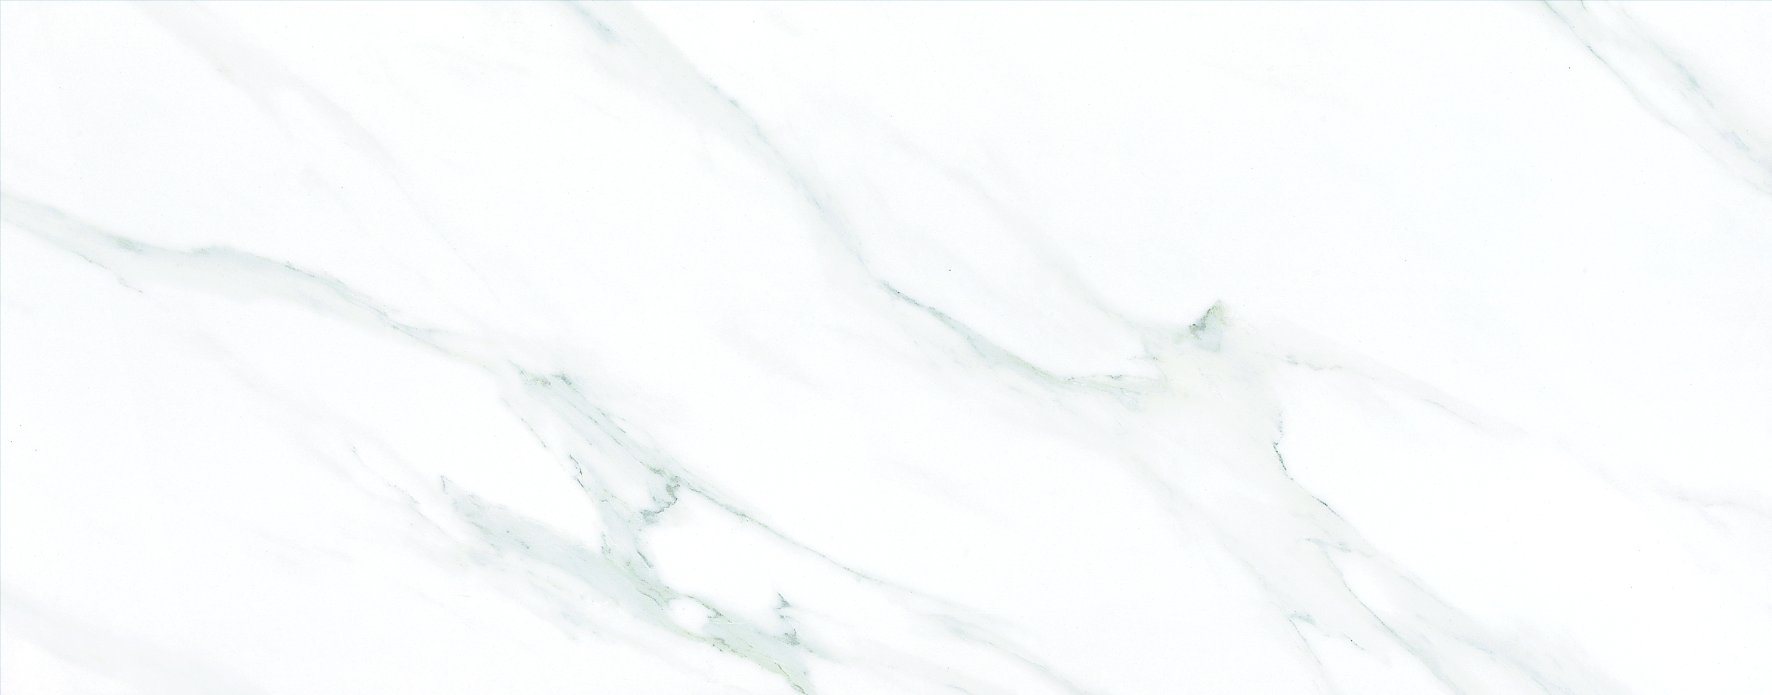 European Hot Sale Specification 1200*470mm Polished Marble Wall or Floor Ceramics Tile (VAK1200P)